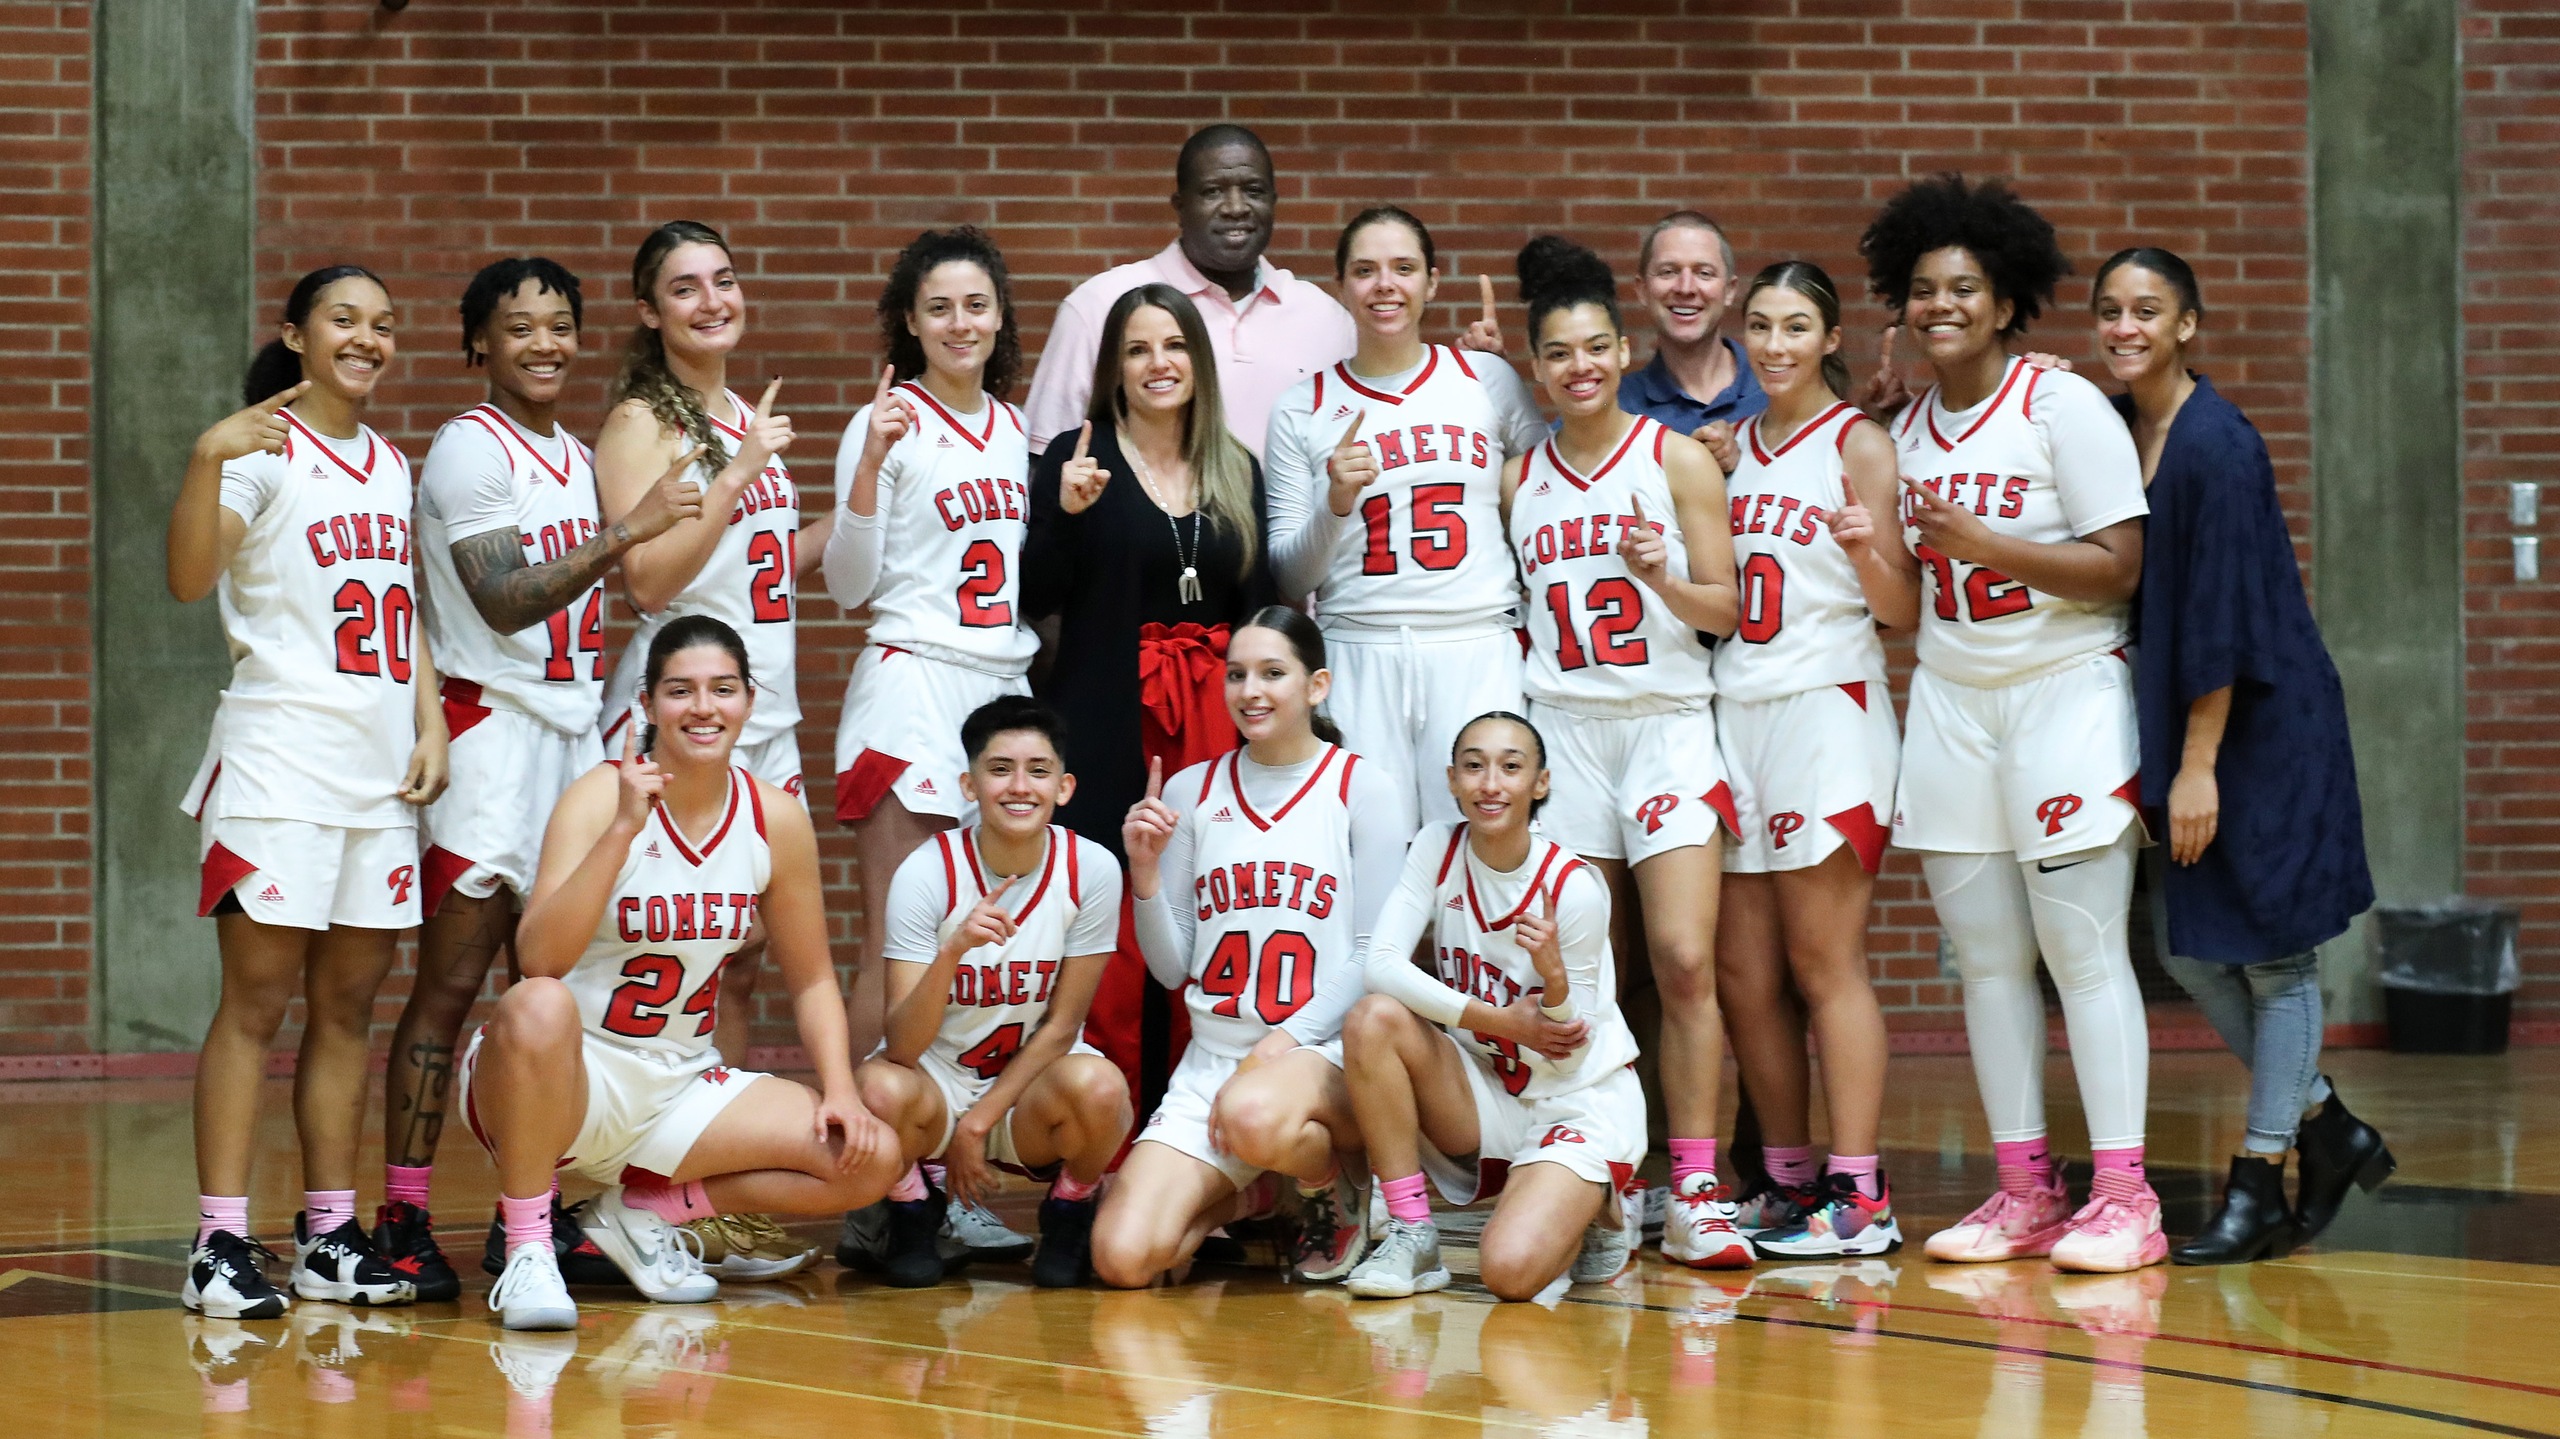 Palomar claimed the PCAC title with a perfect 14-0 conference record. Photo by Hugh Cox.